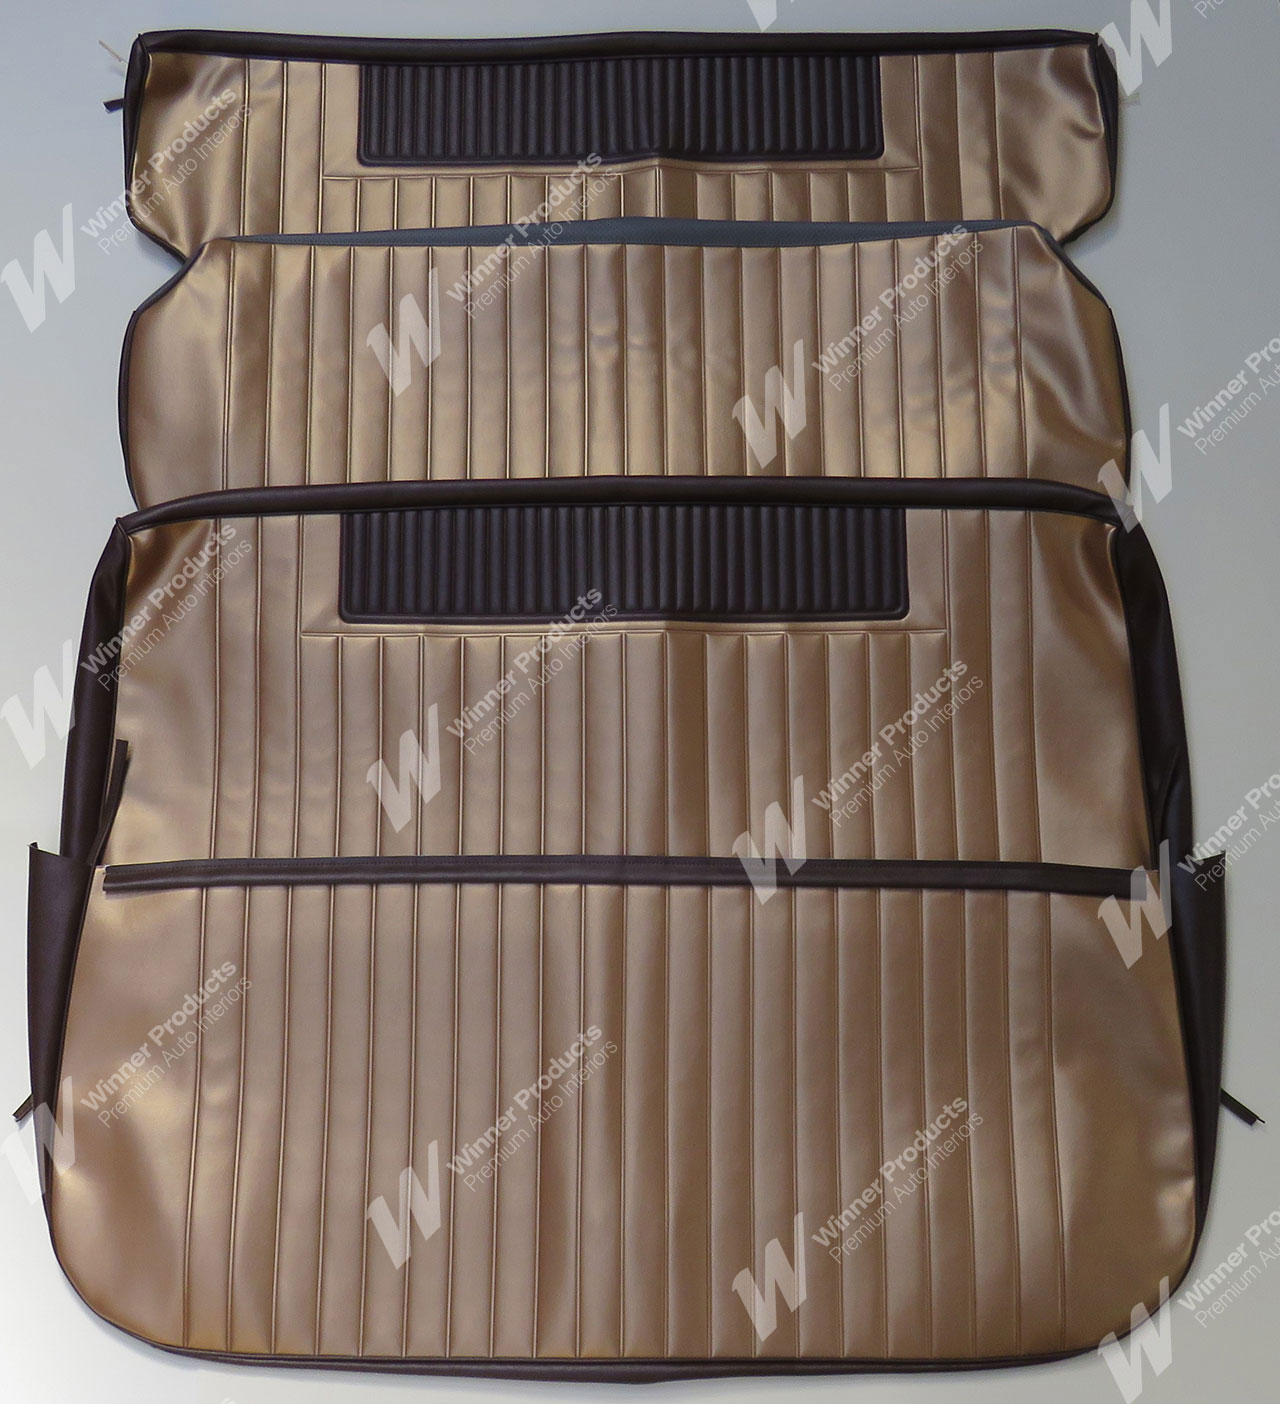 Holden Special EH Special Wagon C42 Aztec Gold & Jamboree Brown Seat Covers (Image 1 of 6)